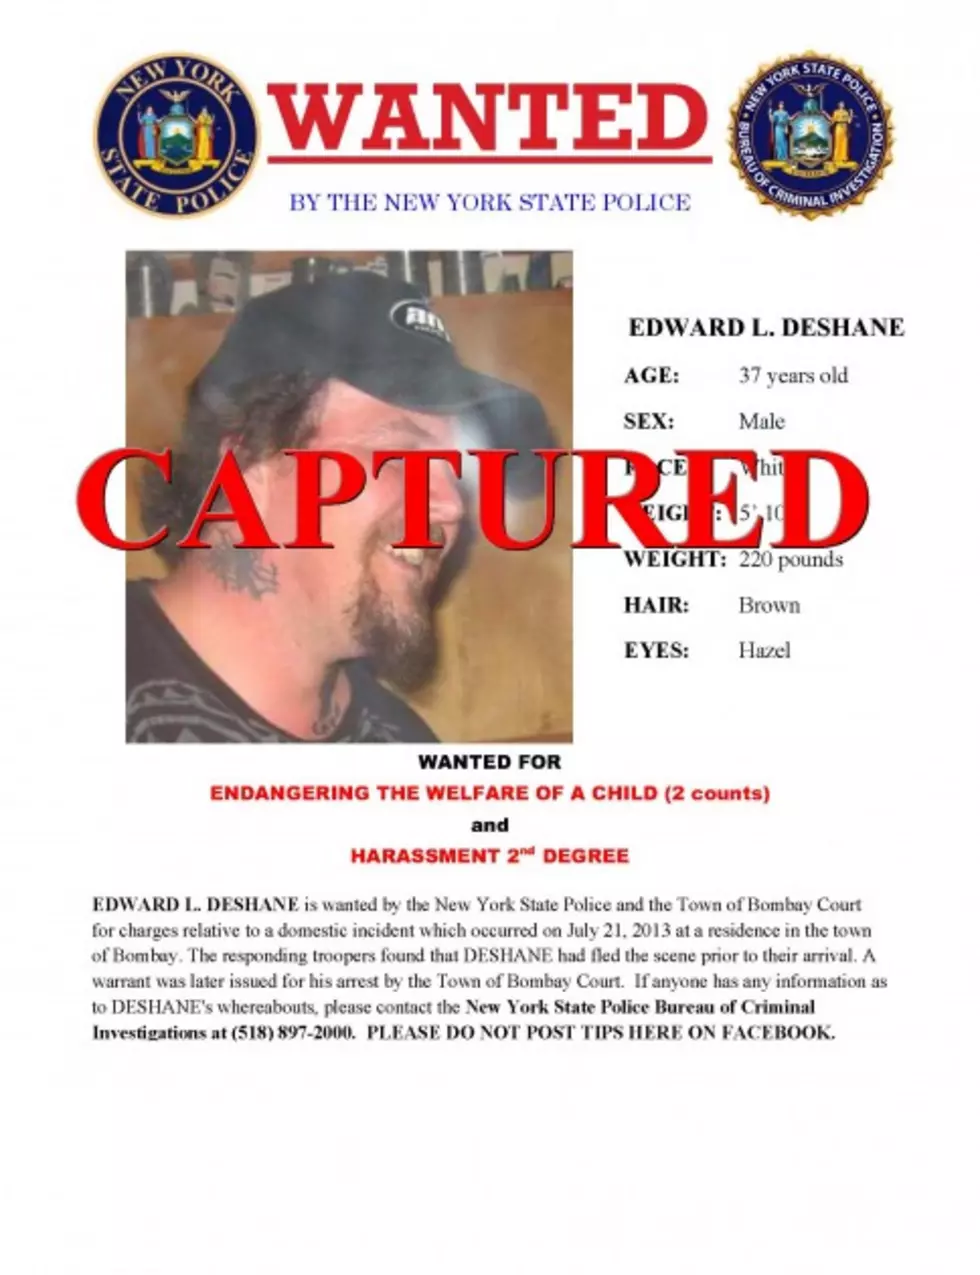 Wanted Man Arrested by State Police in Ogdensburg Using Facebook